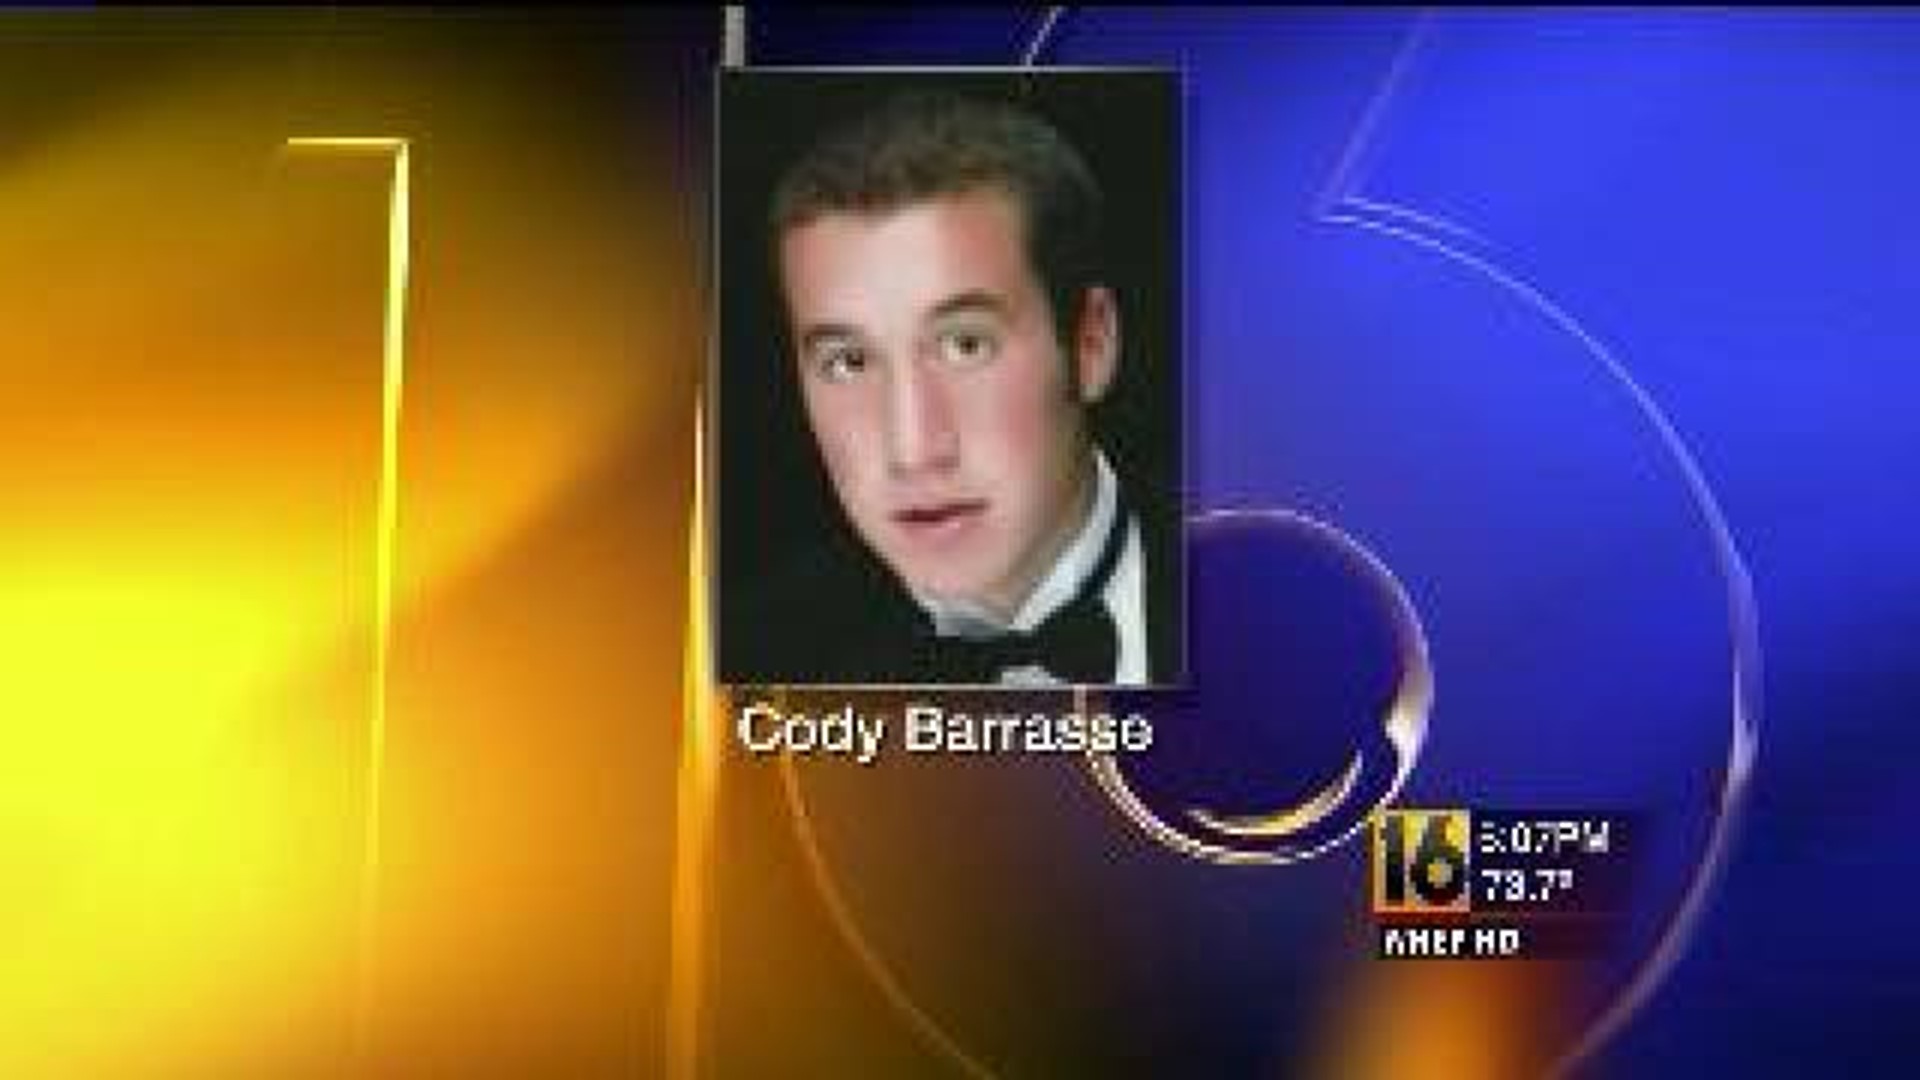 No Charges In Deadly Pittsburgh Crash